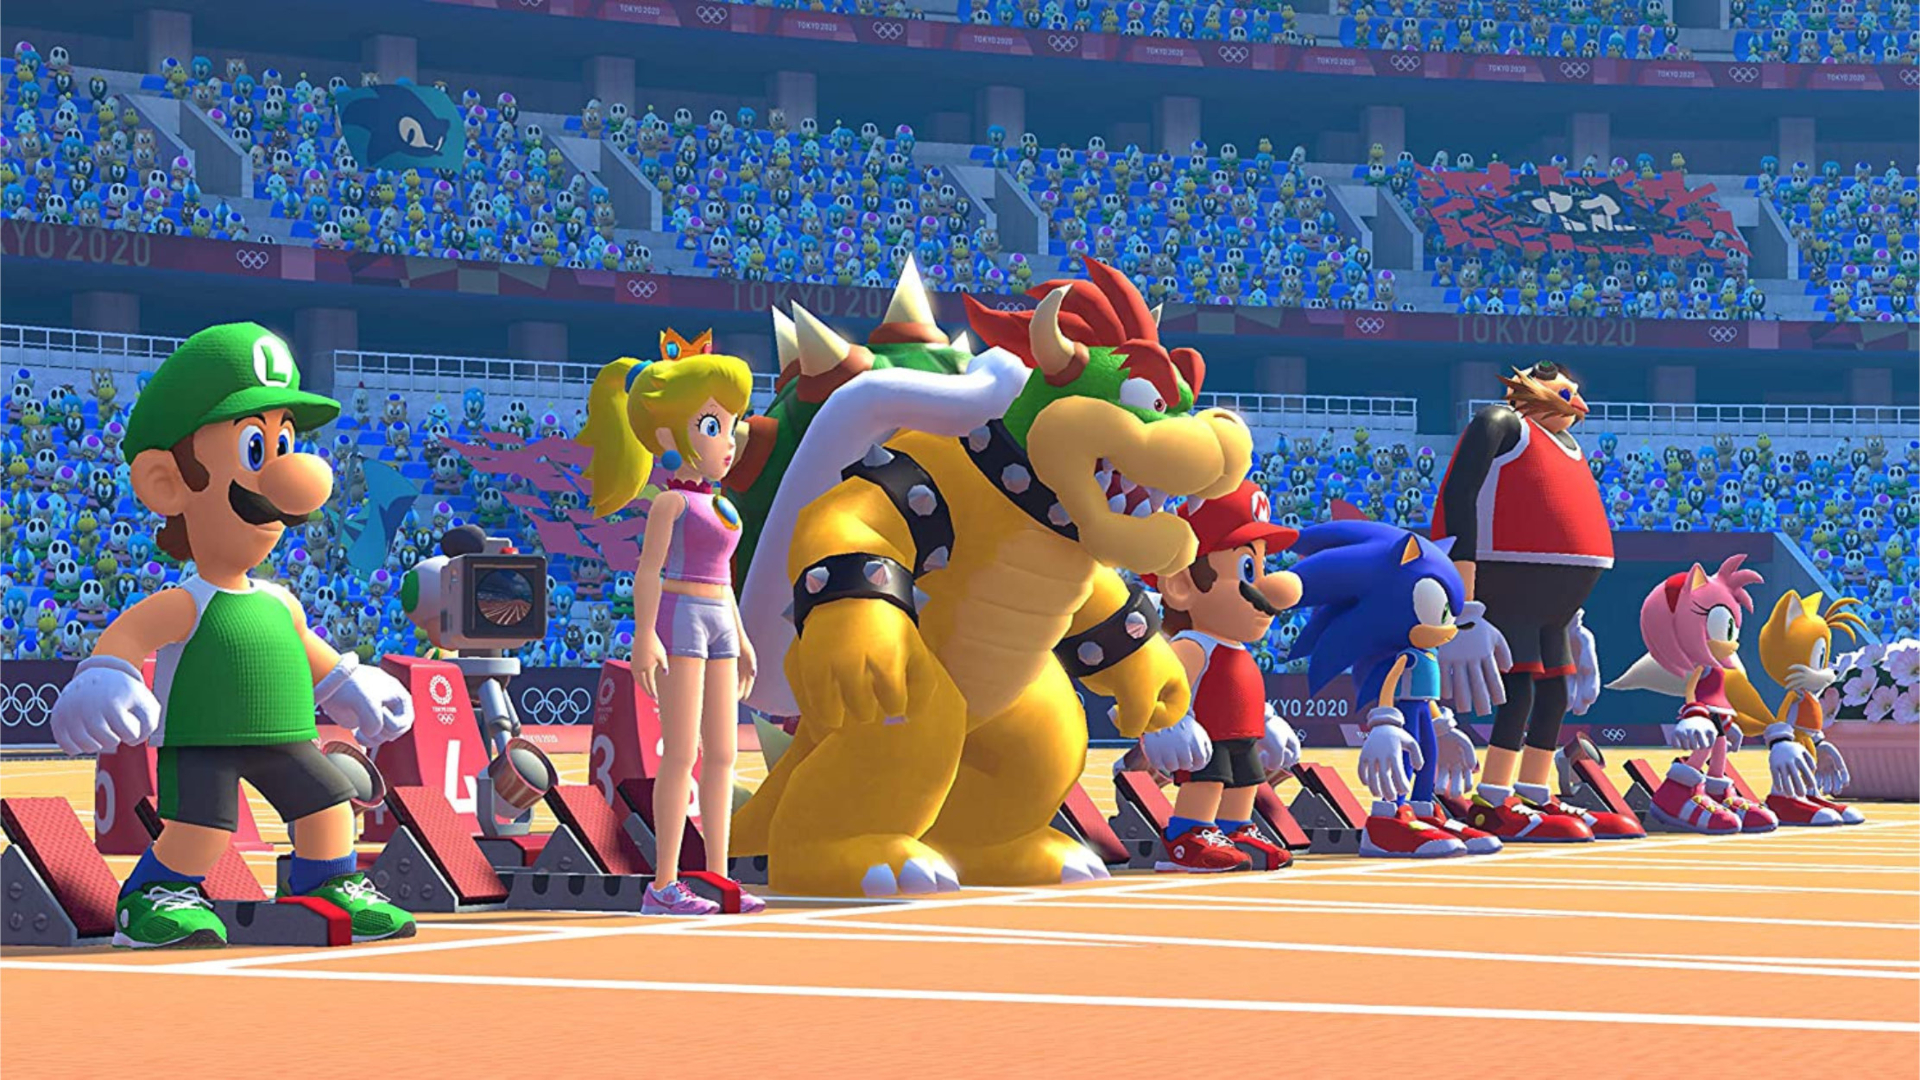 All the game characters on the starting line